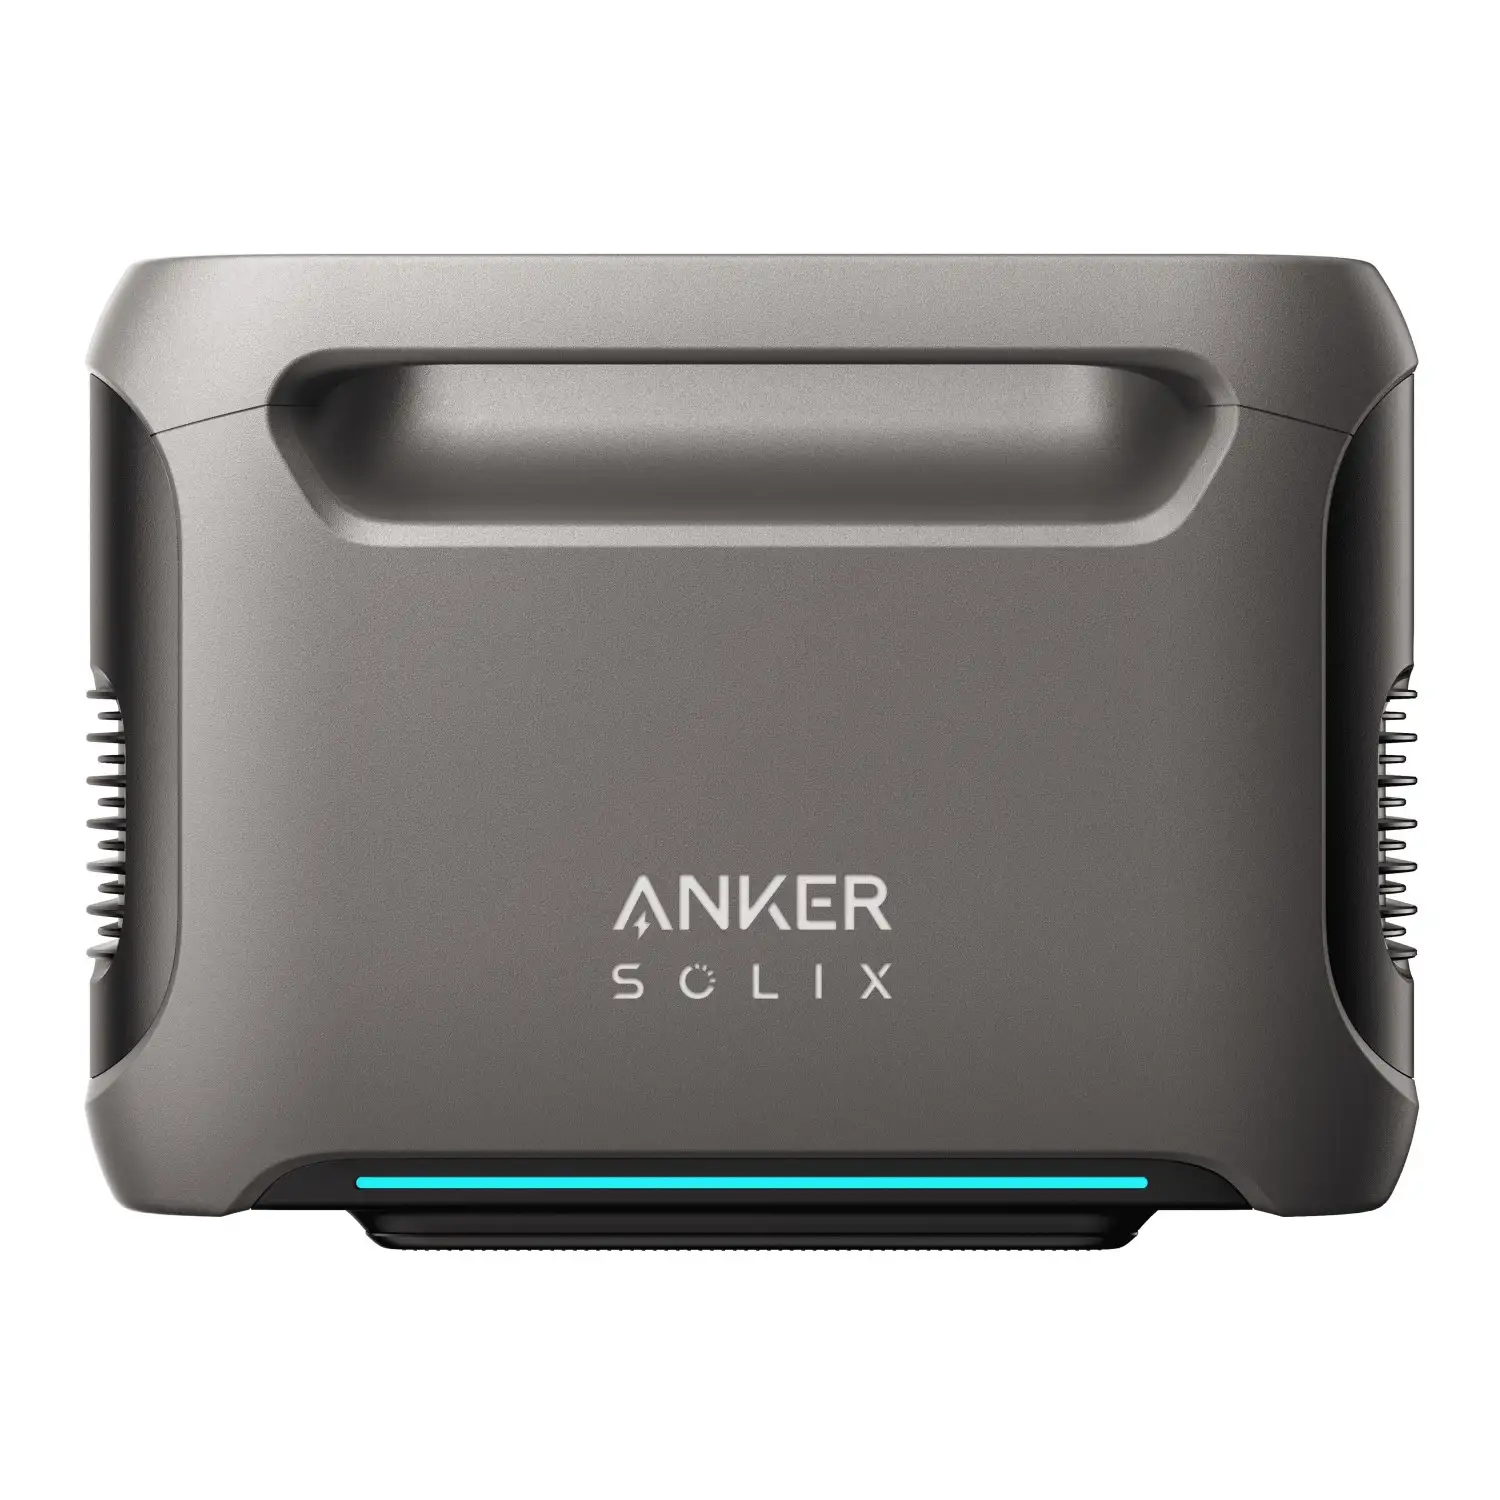 Anker SOLIX F3800EB Expansion Battery